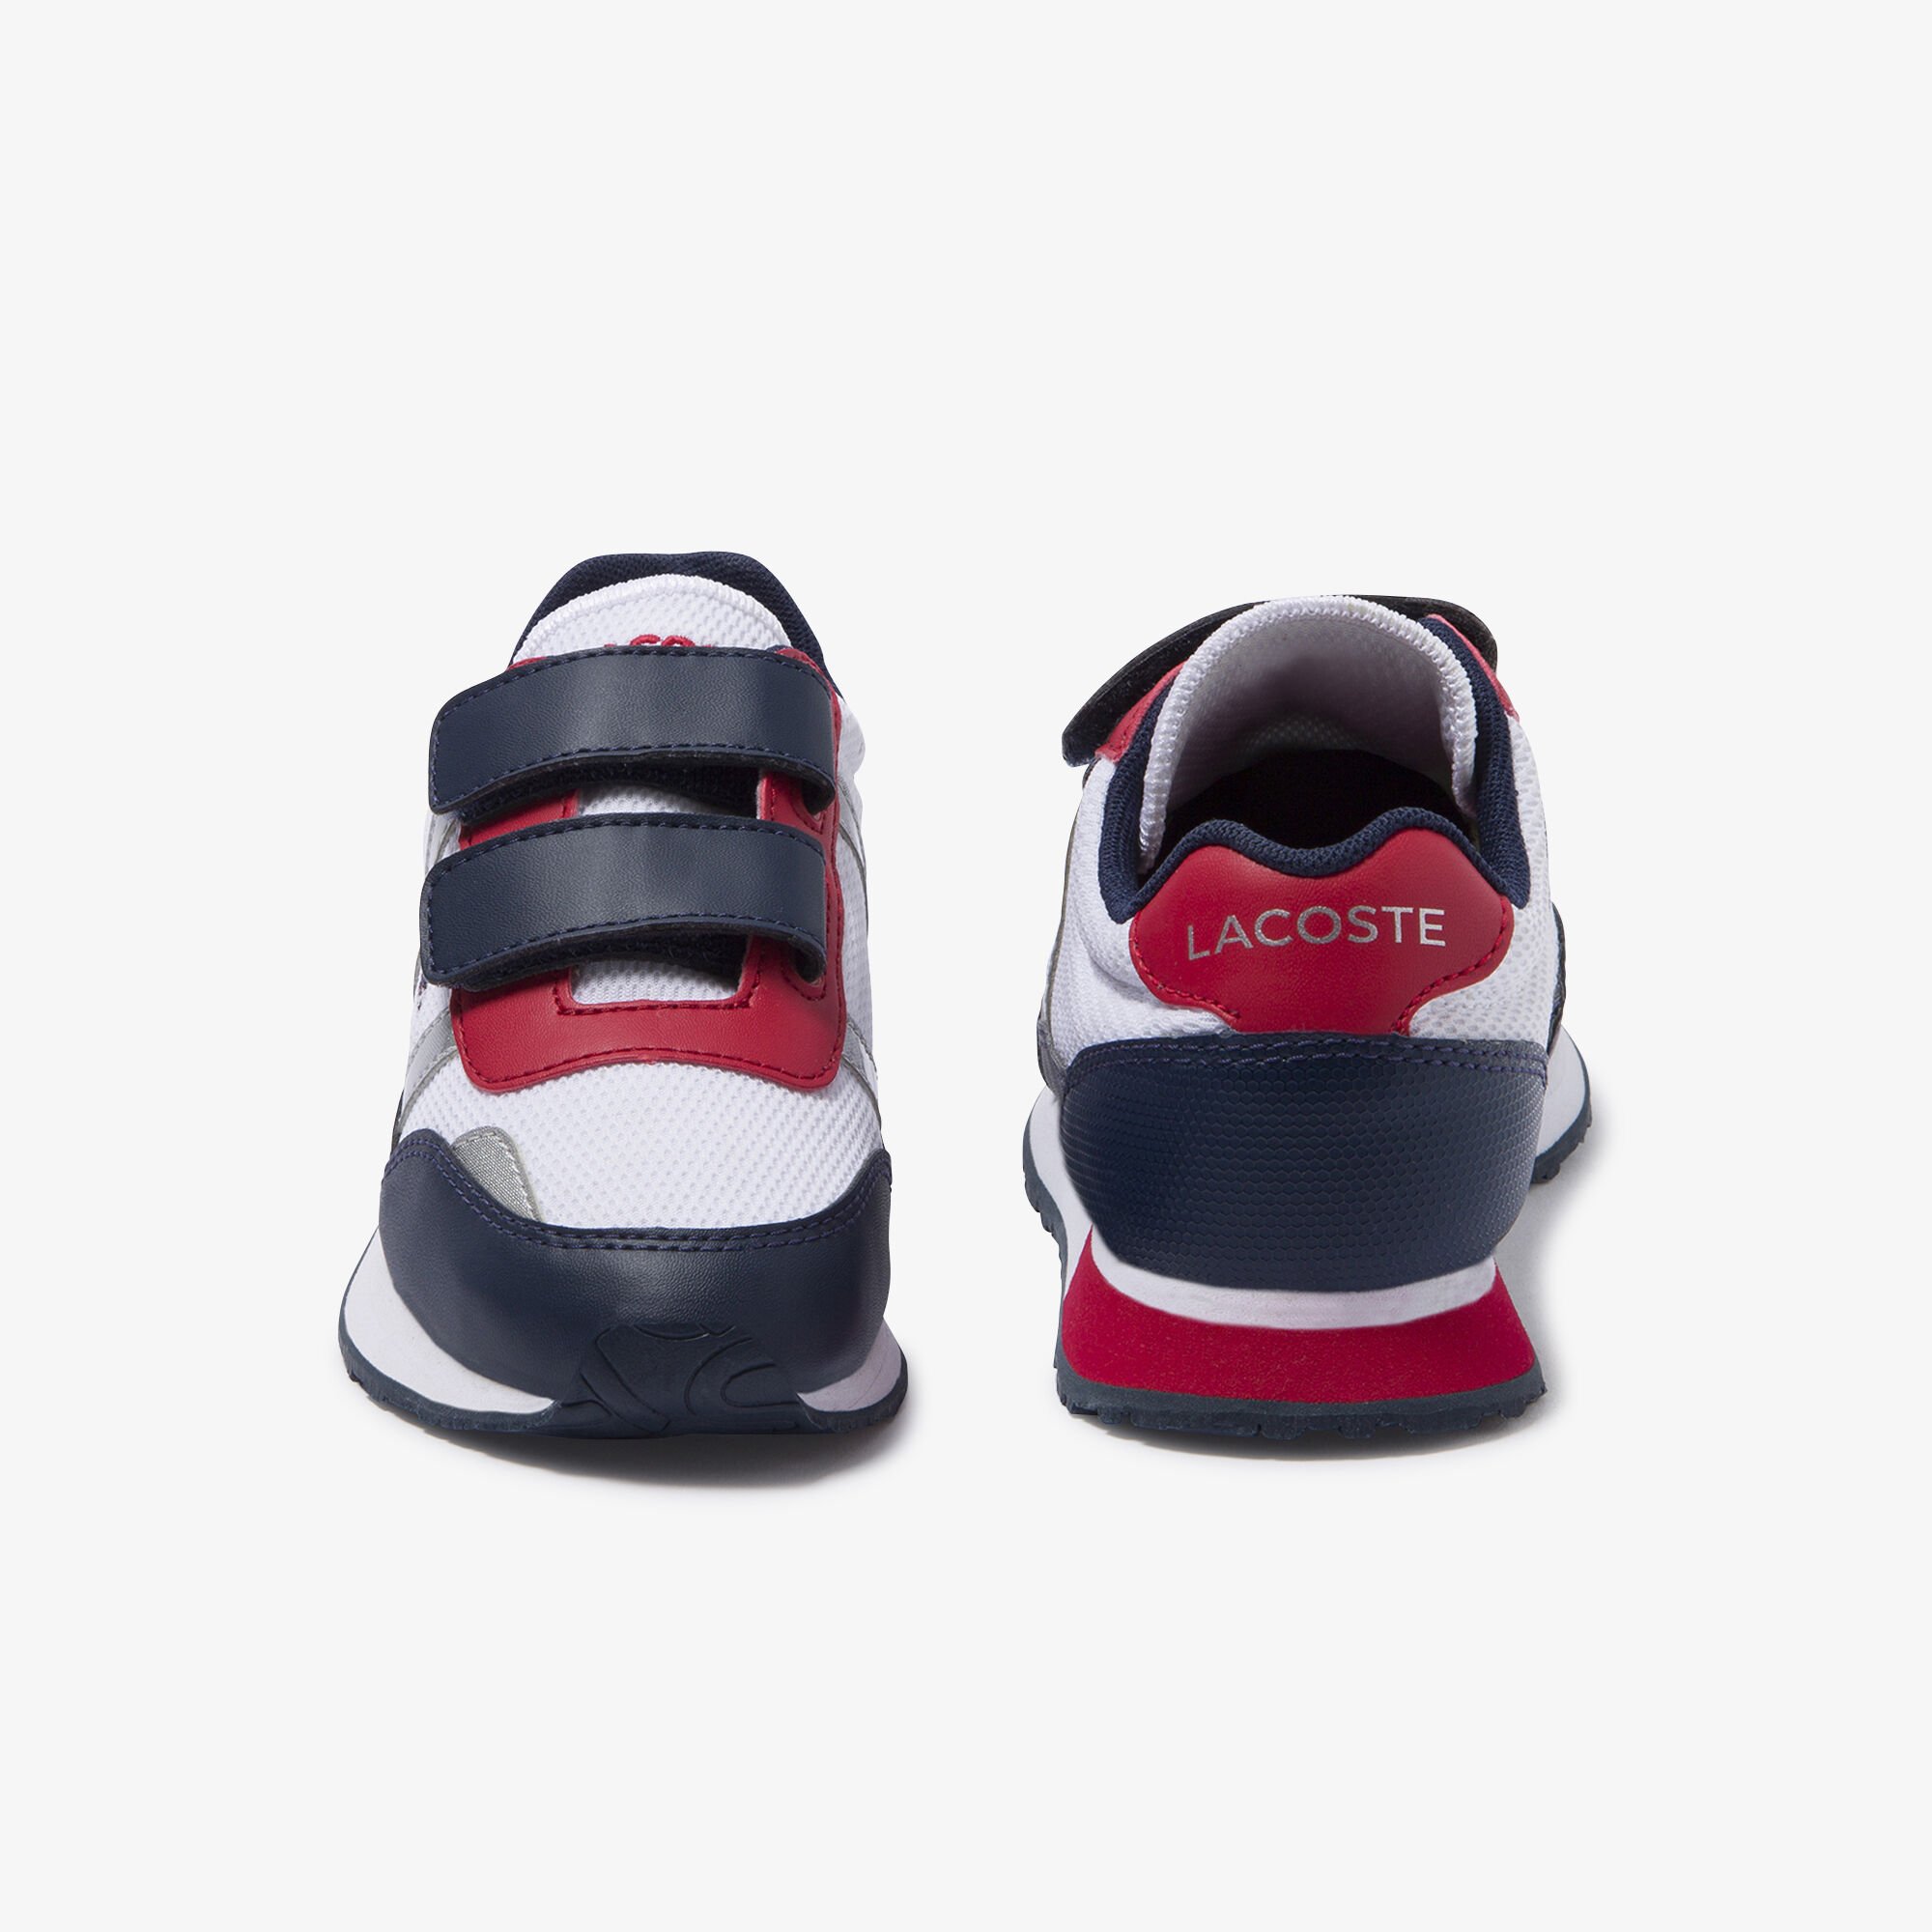 Children's Partner Textile and Synthetic Sneakers